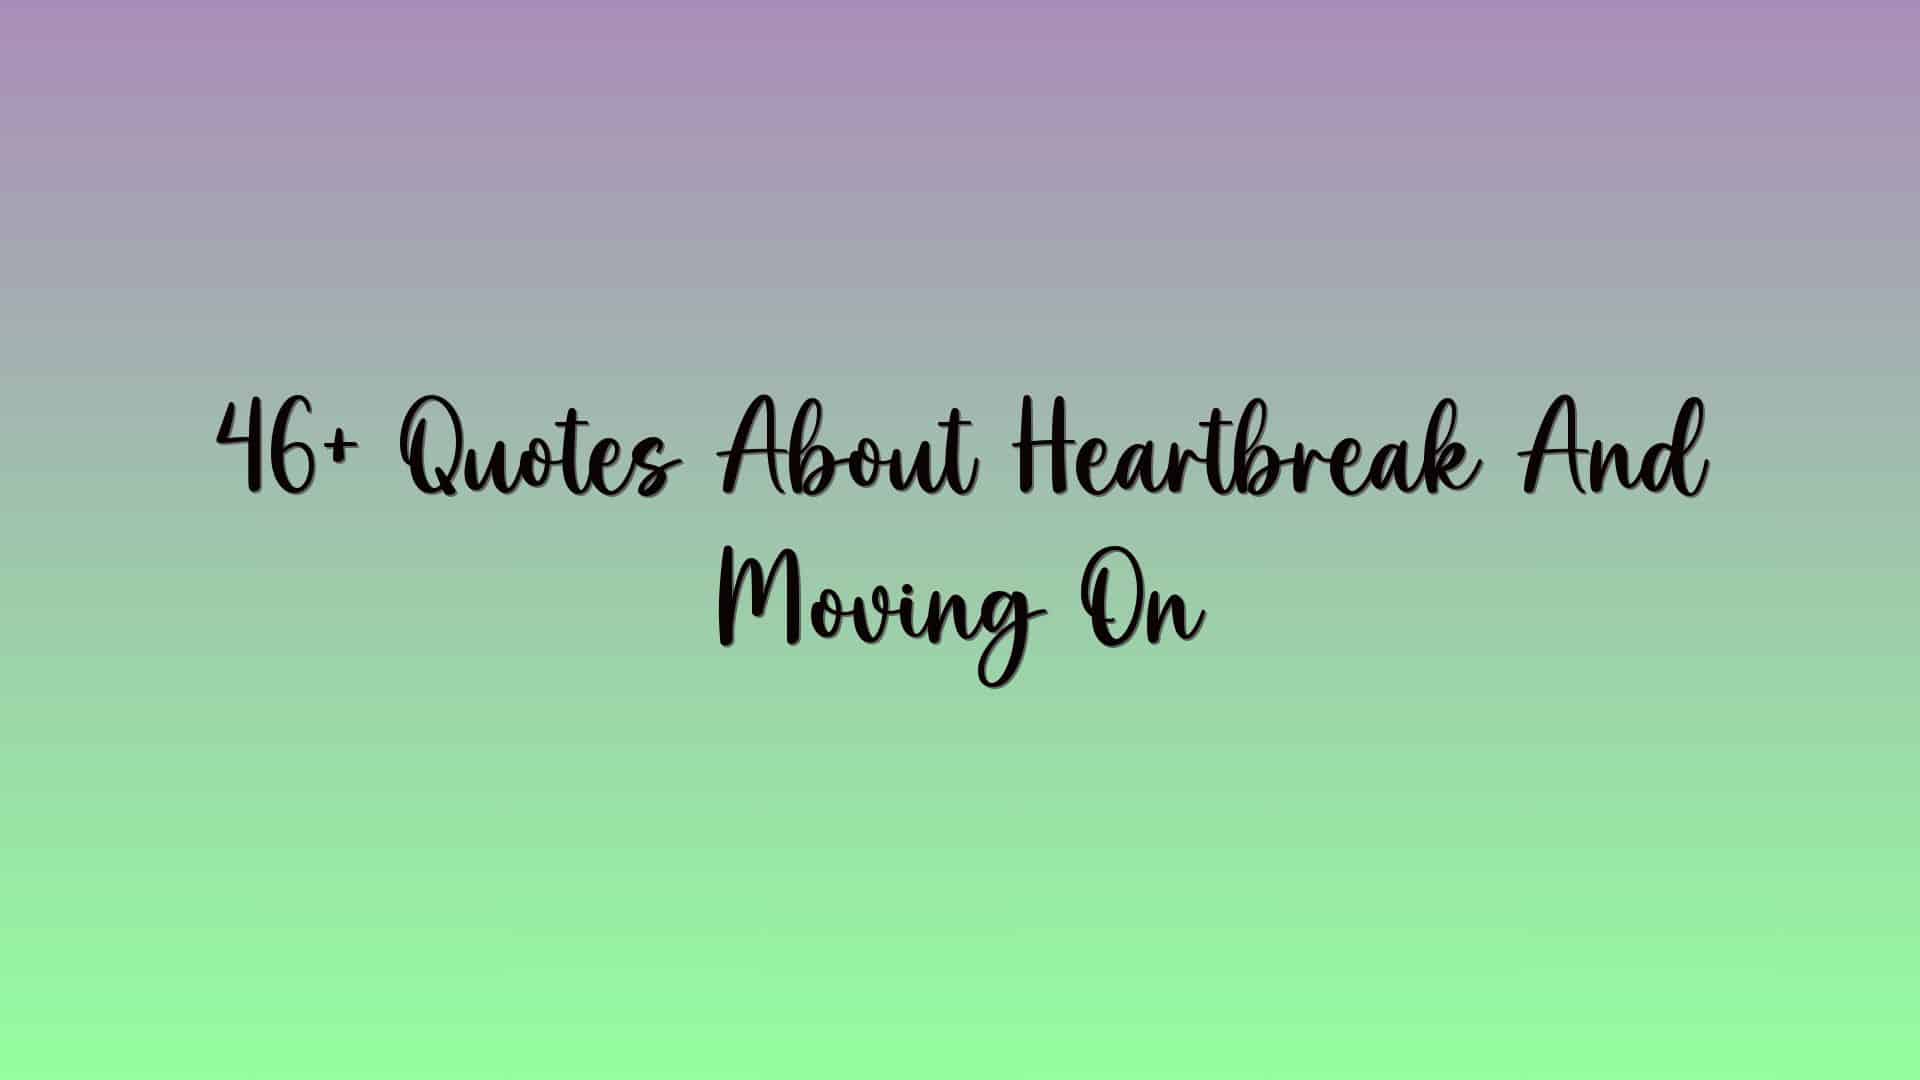 46+ Quotes About Heartbreak And Moving On